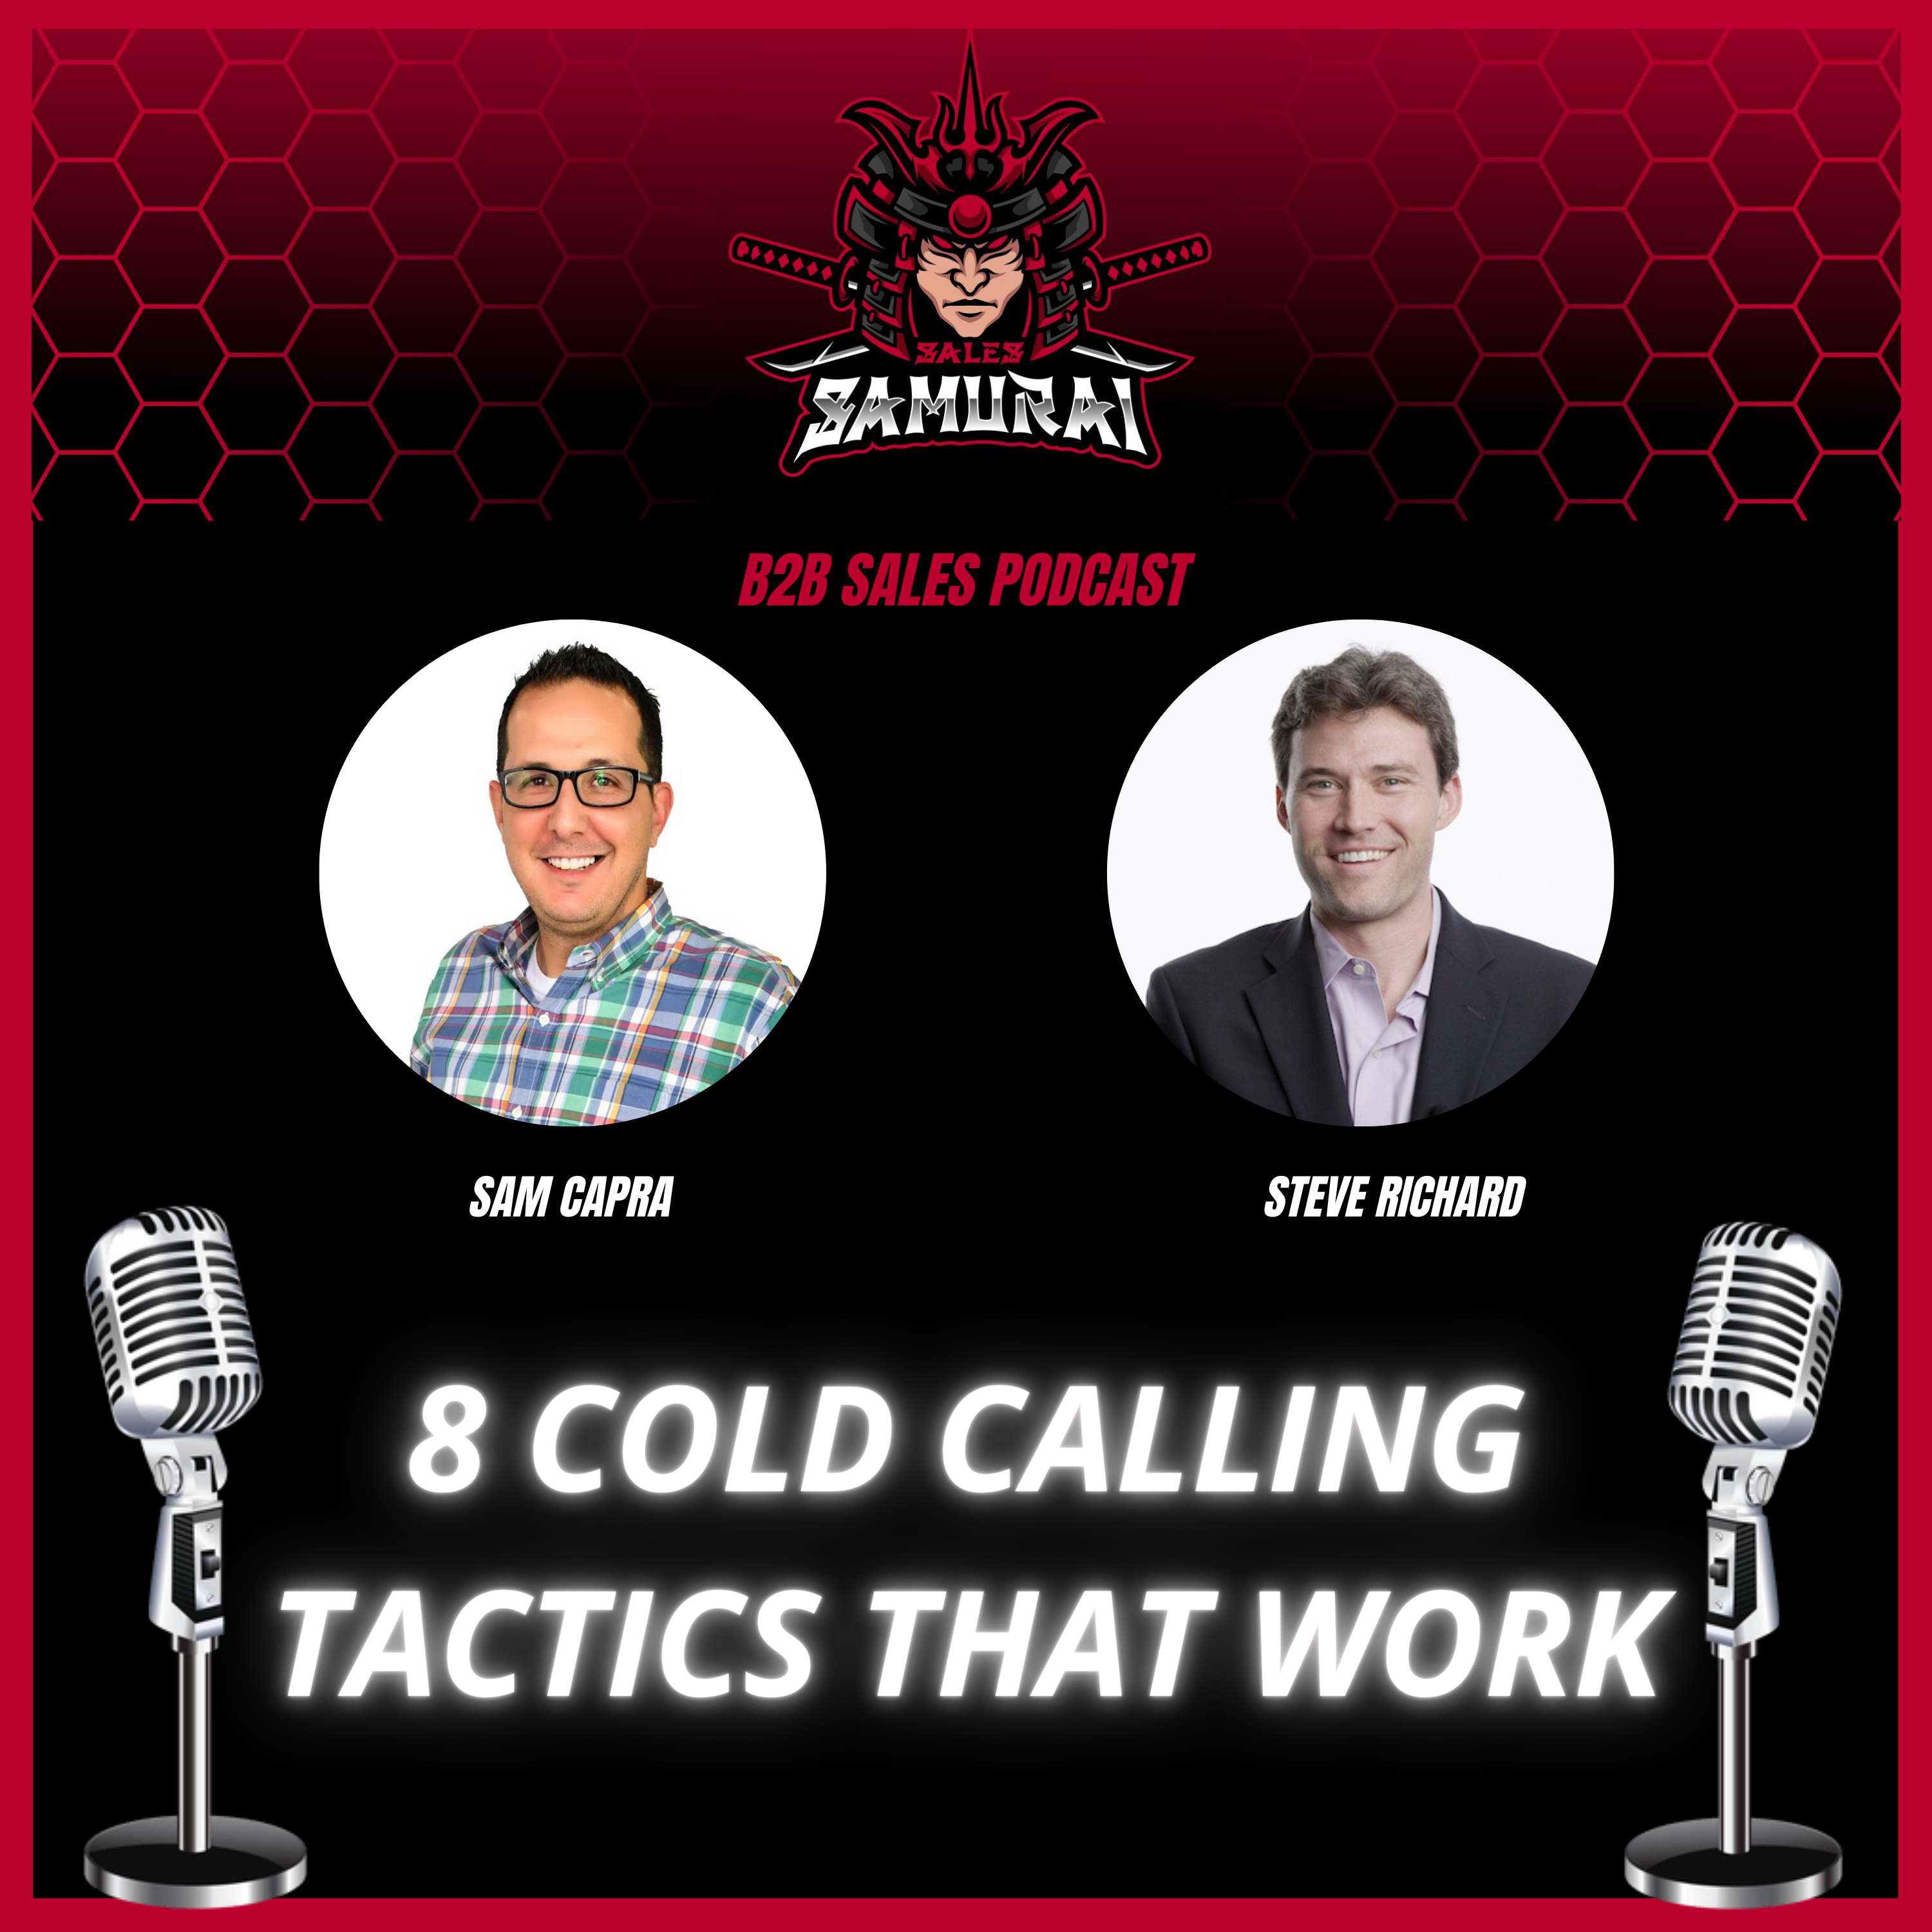 8 cold calling tactics that work